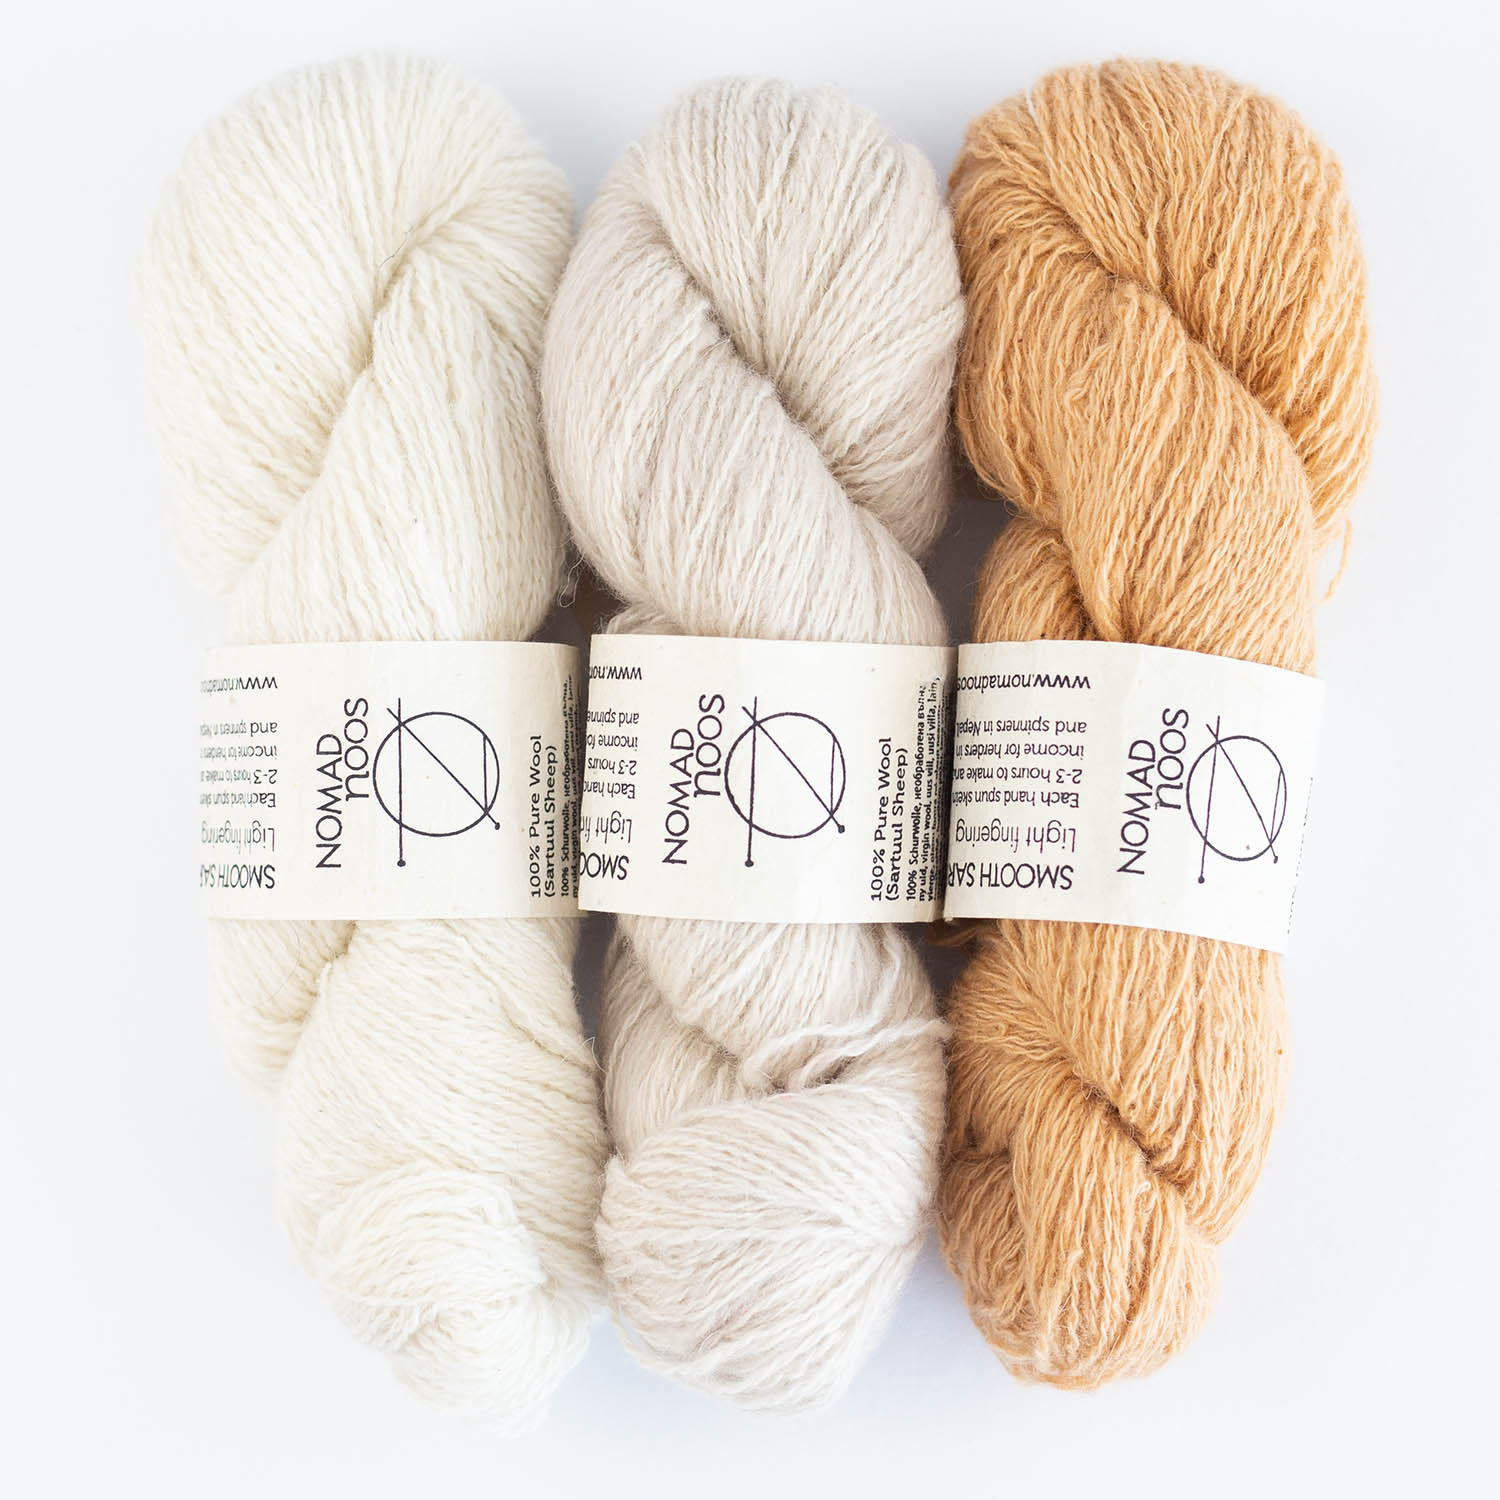 https://nomadnoos.com/wp-content/uploads/2021/09/Smooth-Startuul-Sheep-wool-2-ply-1.jpg